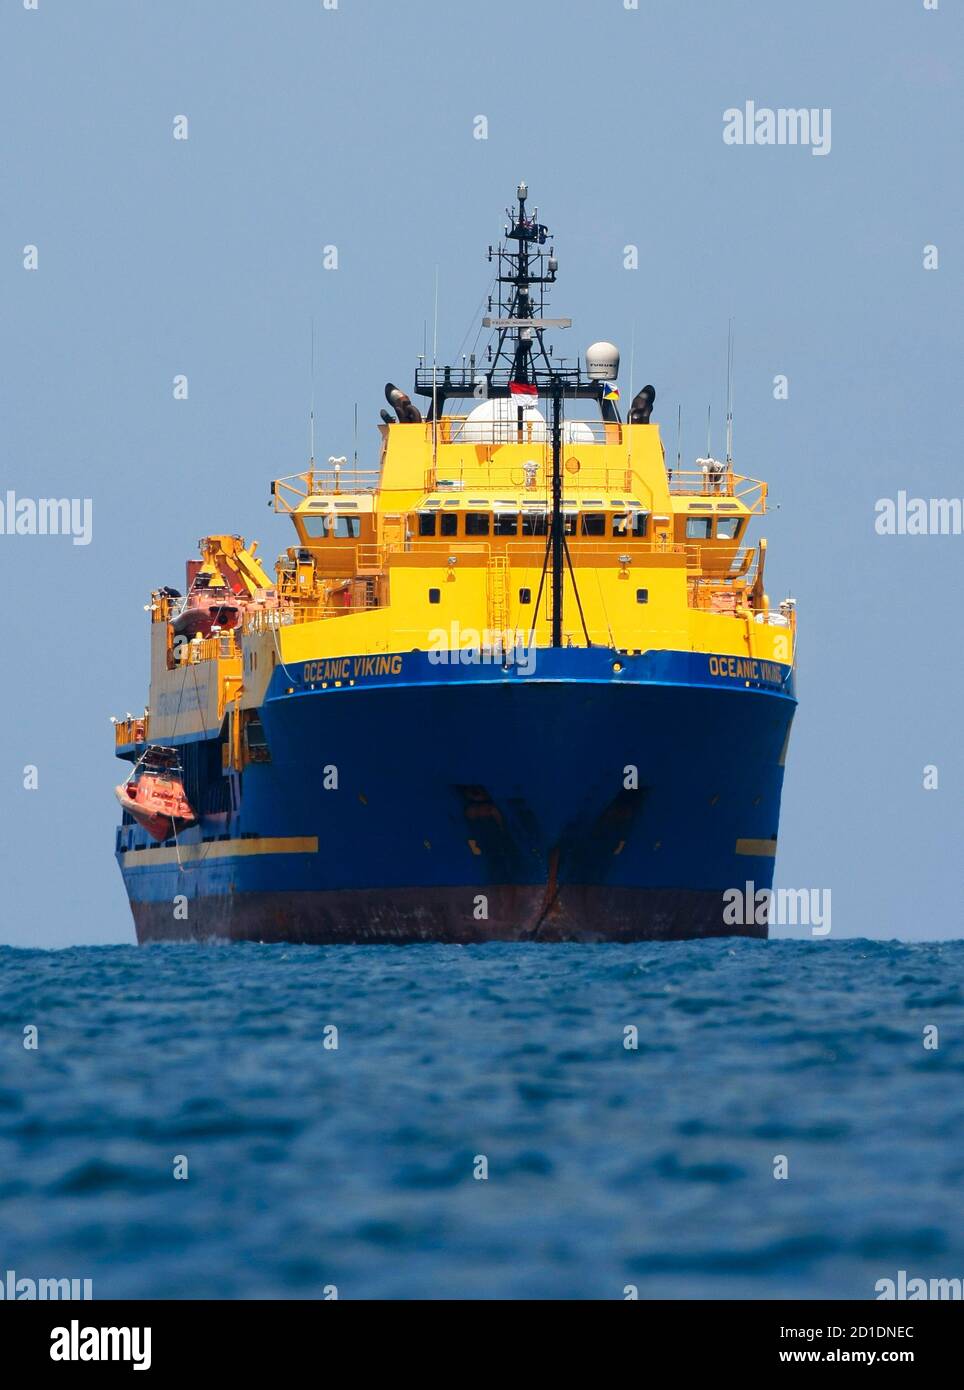 The Australian coast guard vessel Oceanic Viking is seen anchored in the seas east of the Tanjung Pinang and the port of Kijang on the Indonesian island of Bintan October 26, 2009. Seventy eight Sri Lankan asylum seekers rescued by an Australian customs vessel in Indonesian waters are to be taken to a detention centre on the Indonesian island of Bintan, an official said on Monday.     REUTERS/Vivek Prakash (INDONESIA POLITICS MILITARY SOCIETY) Stock Photo